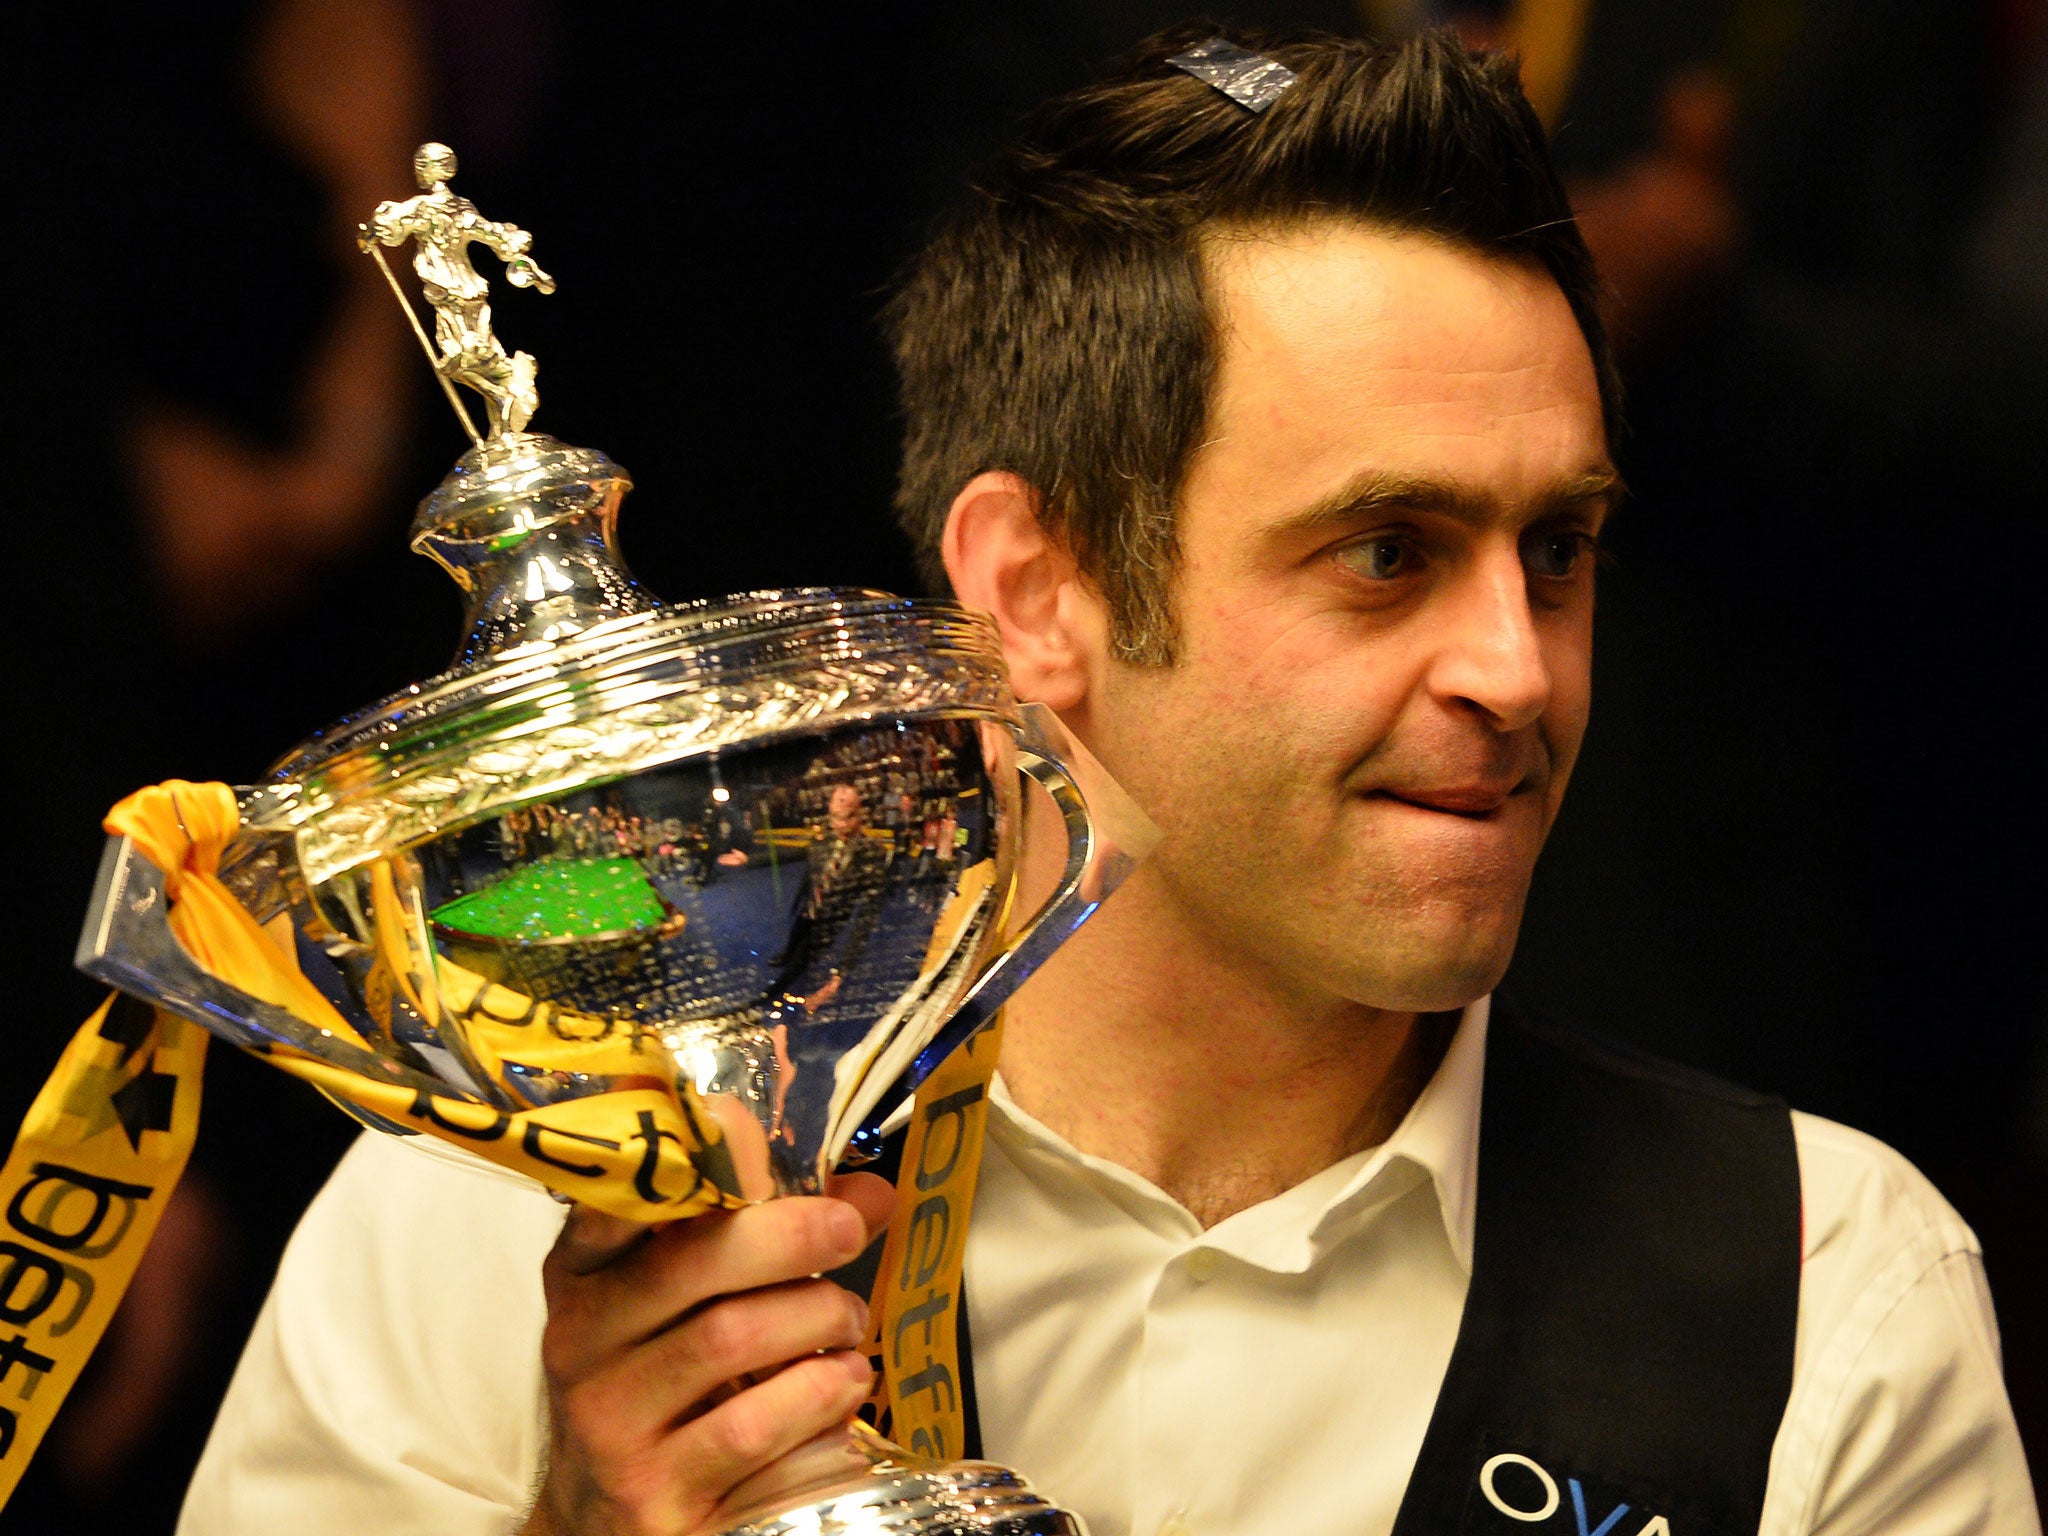 Ronnie O'Sullivan has claimed he was offered £20,000 to fix a match 10 years ago